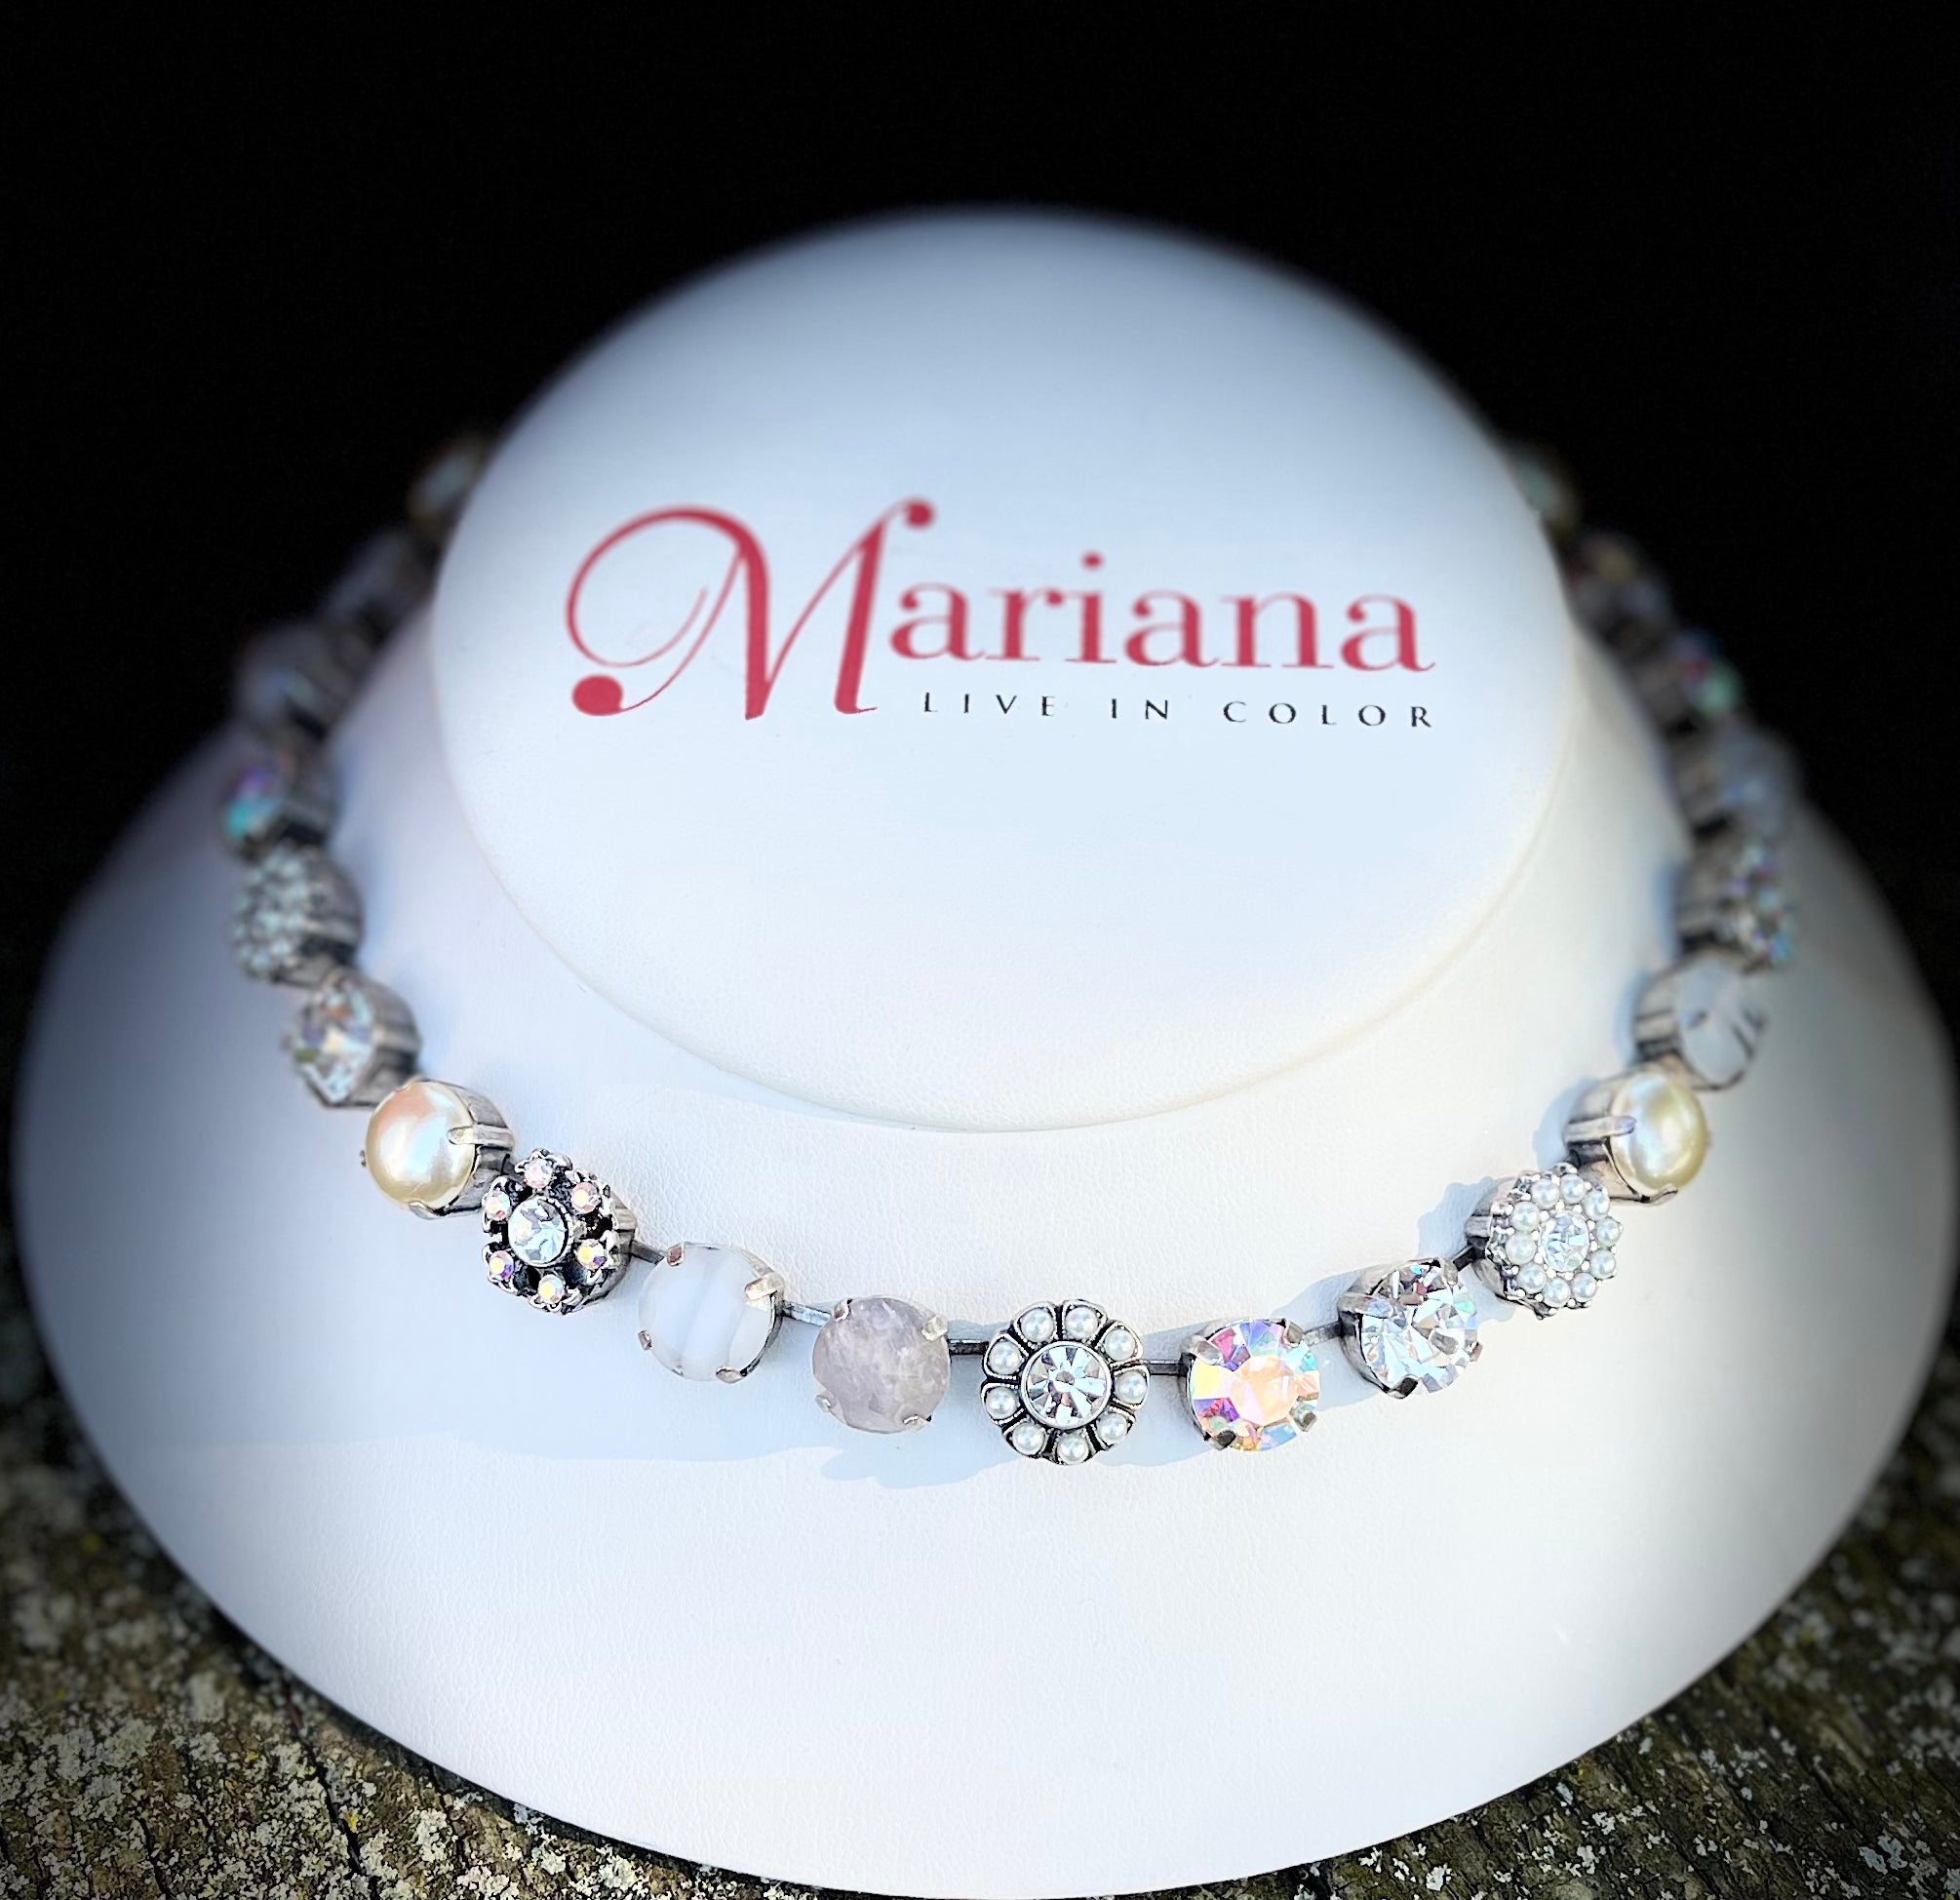 Mariana 3174 Lovable Rosette Necklace "Crystal Pearls" Silver Plated